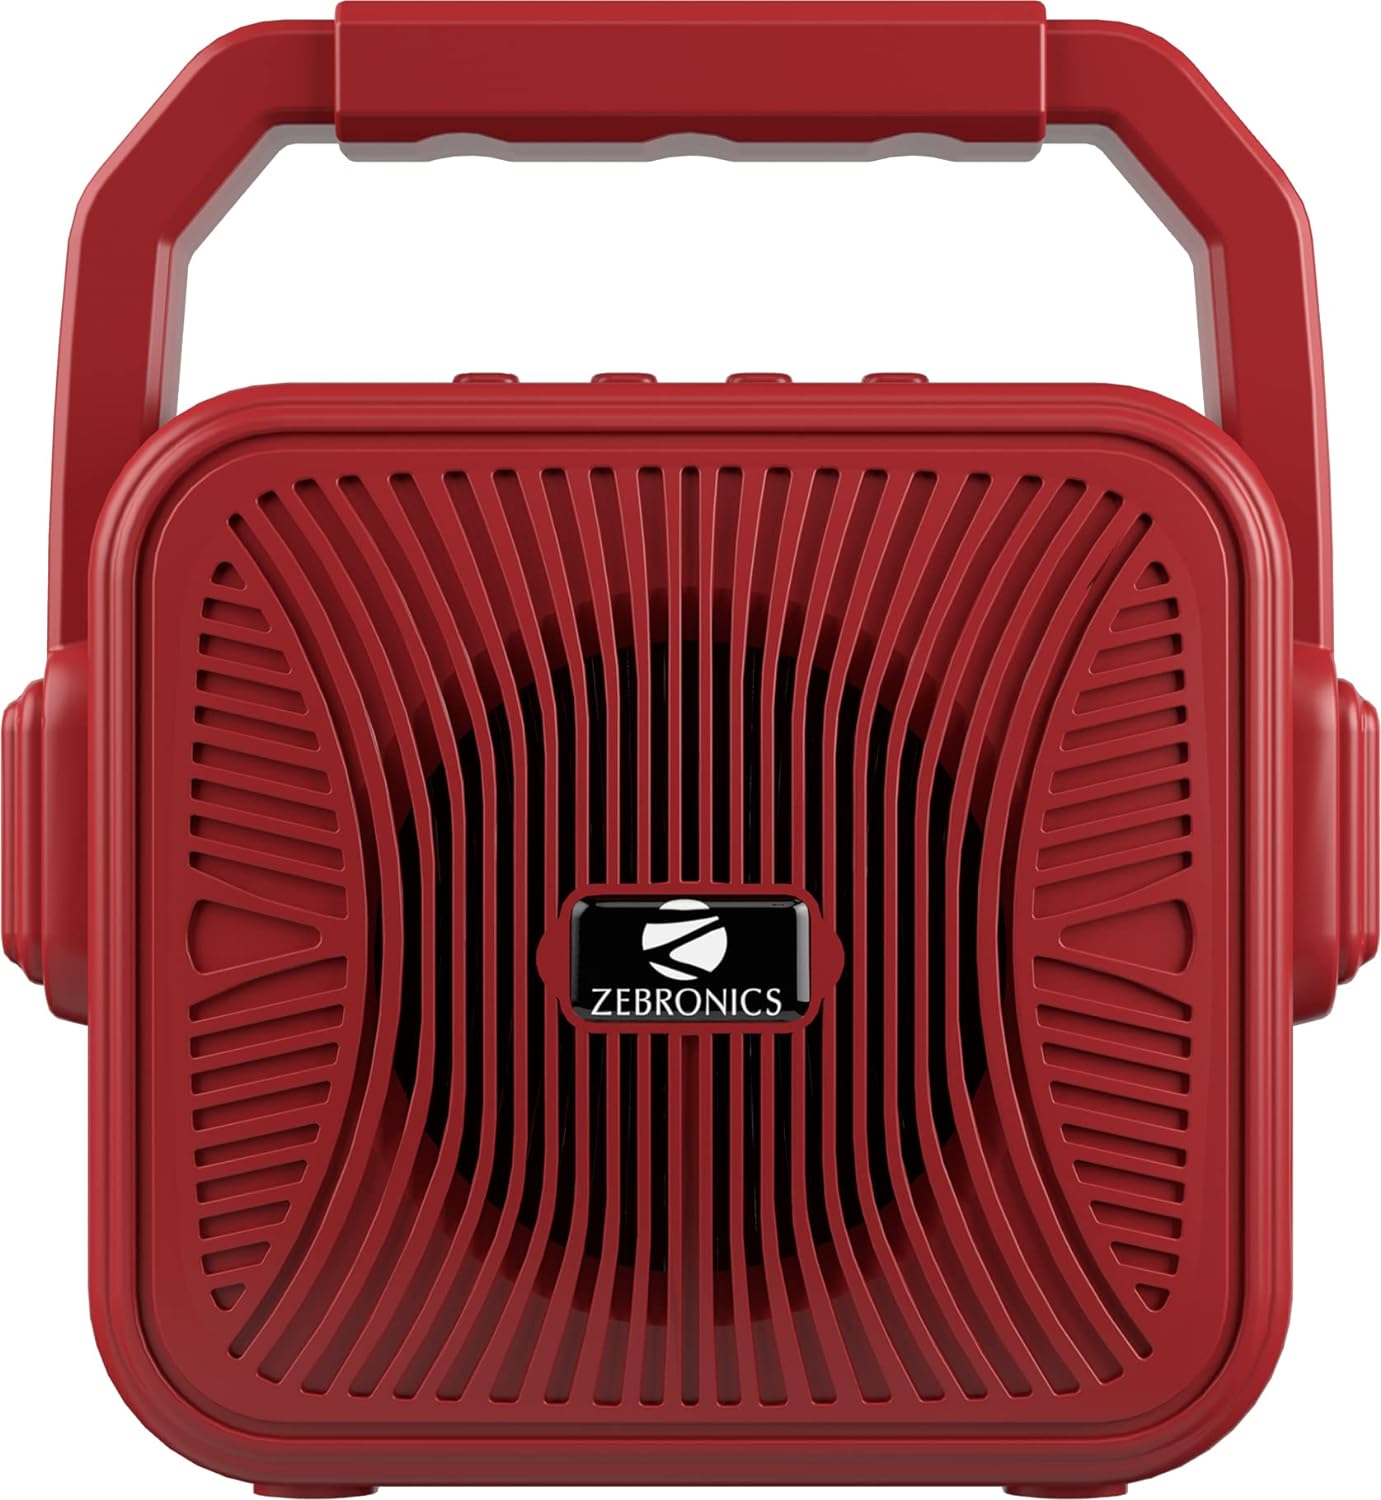 ZEBRONICS Zeb-County 2 Portable Wireless Speaker Supporting Bluetooth v5.0, FM Radio, Call Function, Built-in Rechargeable Battery, USB/Micro SD Card Slot, 3.5mm AUX Input, TWS (Red)